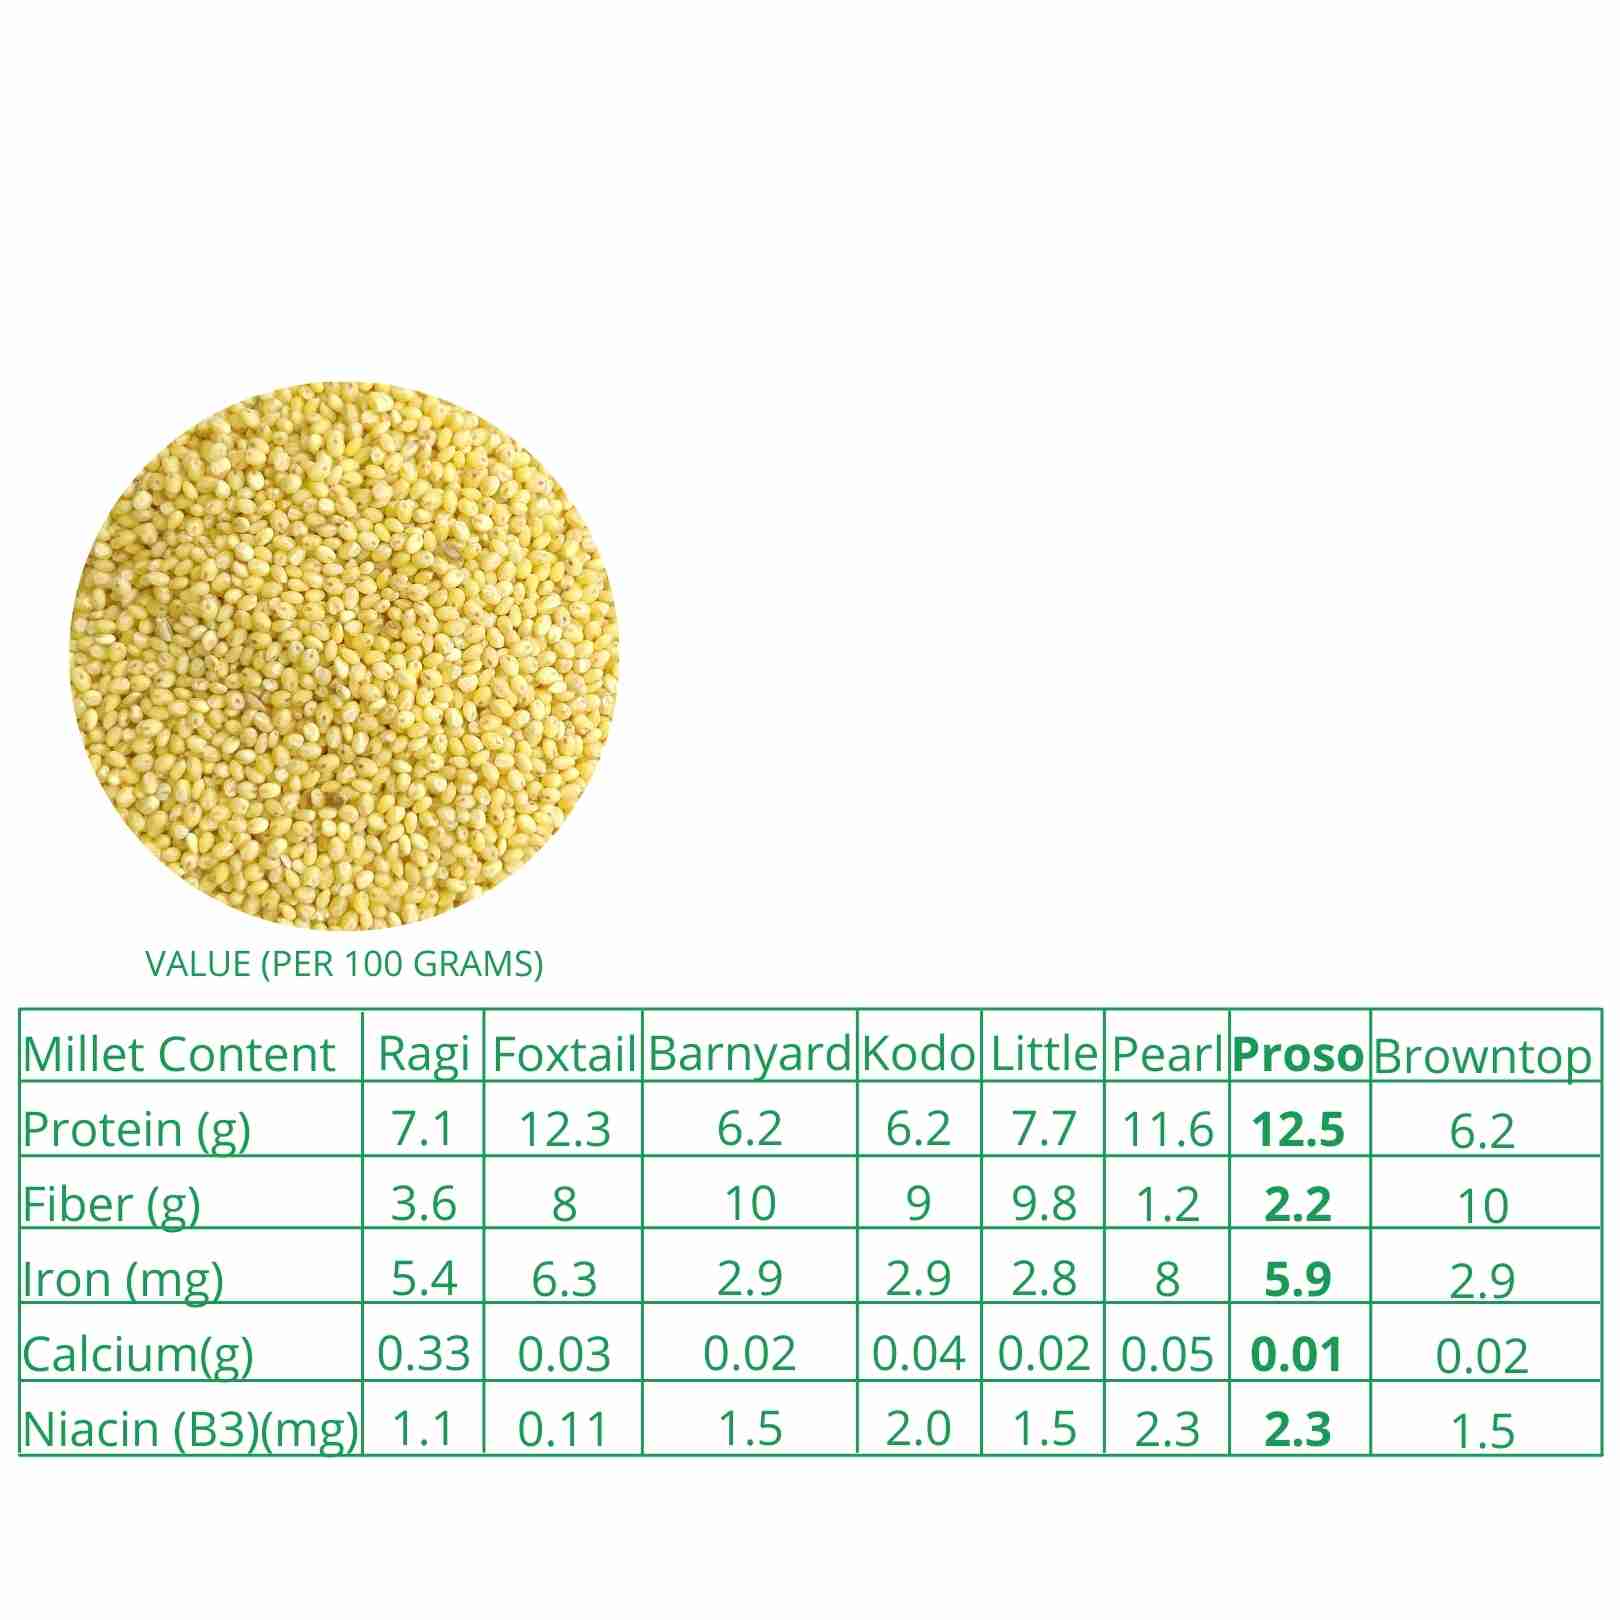 Millet Amma’s Organic Proso Millet- Millet Amma’s Organic Proso Millet contains high levels of lecithin.  These unpolished Proso Millets are rich in B Complex vitamins and essential amino acids.  Proso Millet has a low glycemic index and aids in controlling your glucose levels.